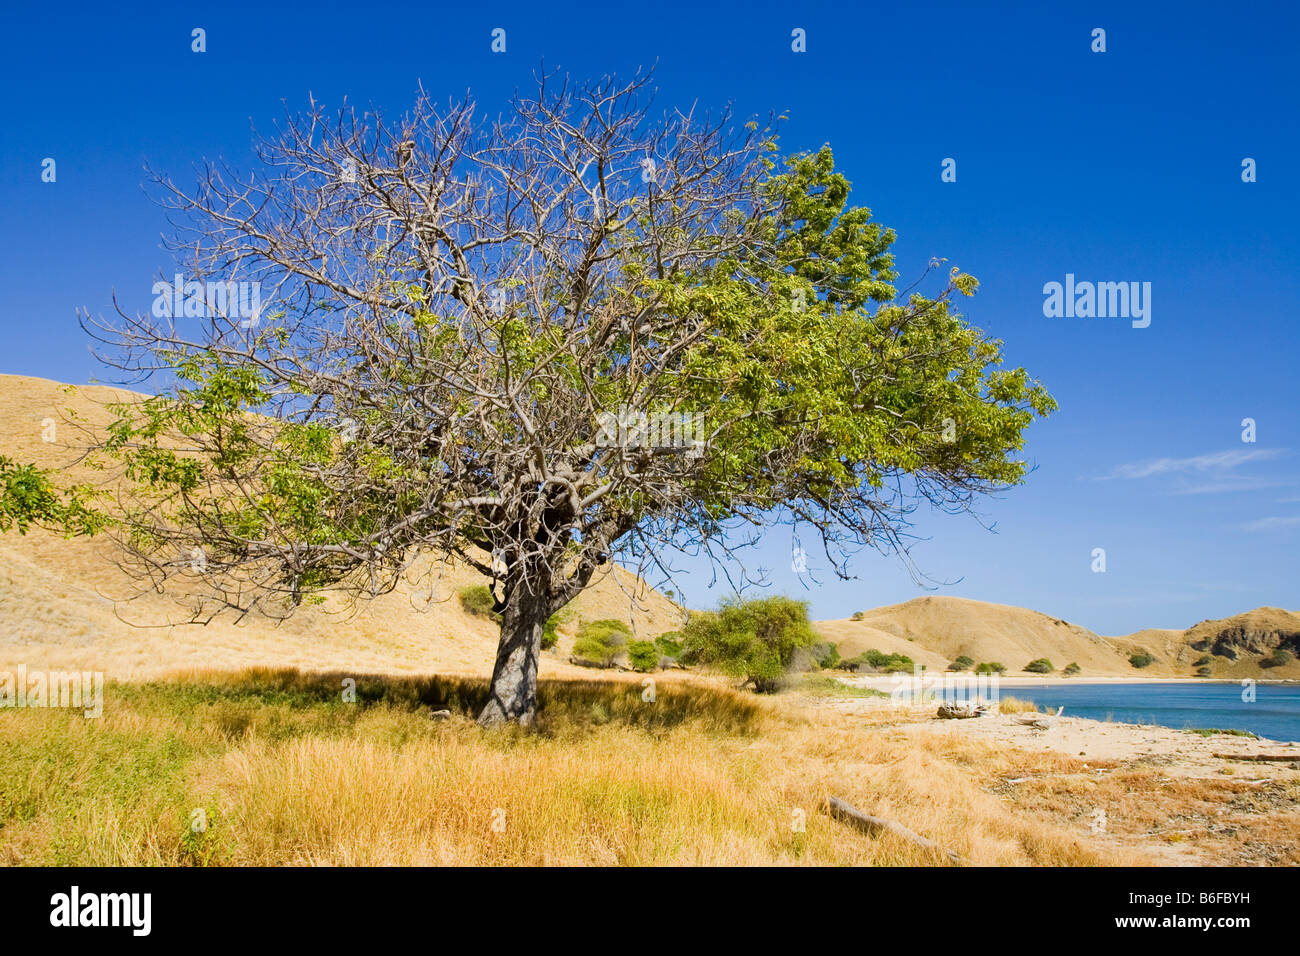 Flora on Komodo Island, Acacia (Acacia tomentosa) and Quilt Grass (Imperata cylindrica) used for roofing material, Komodo Natio Stock Photo